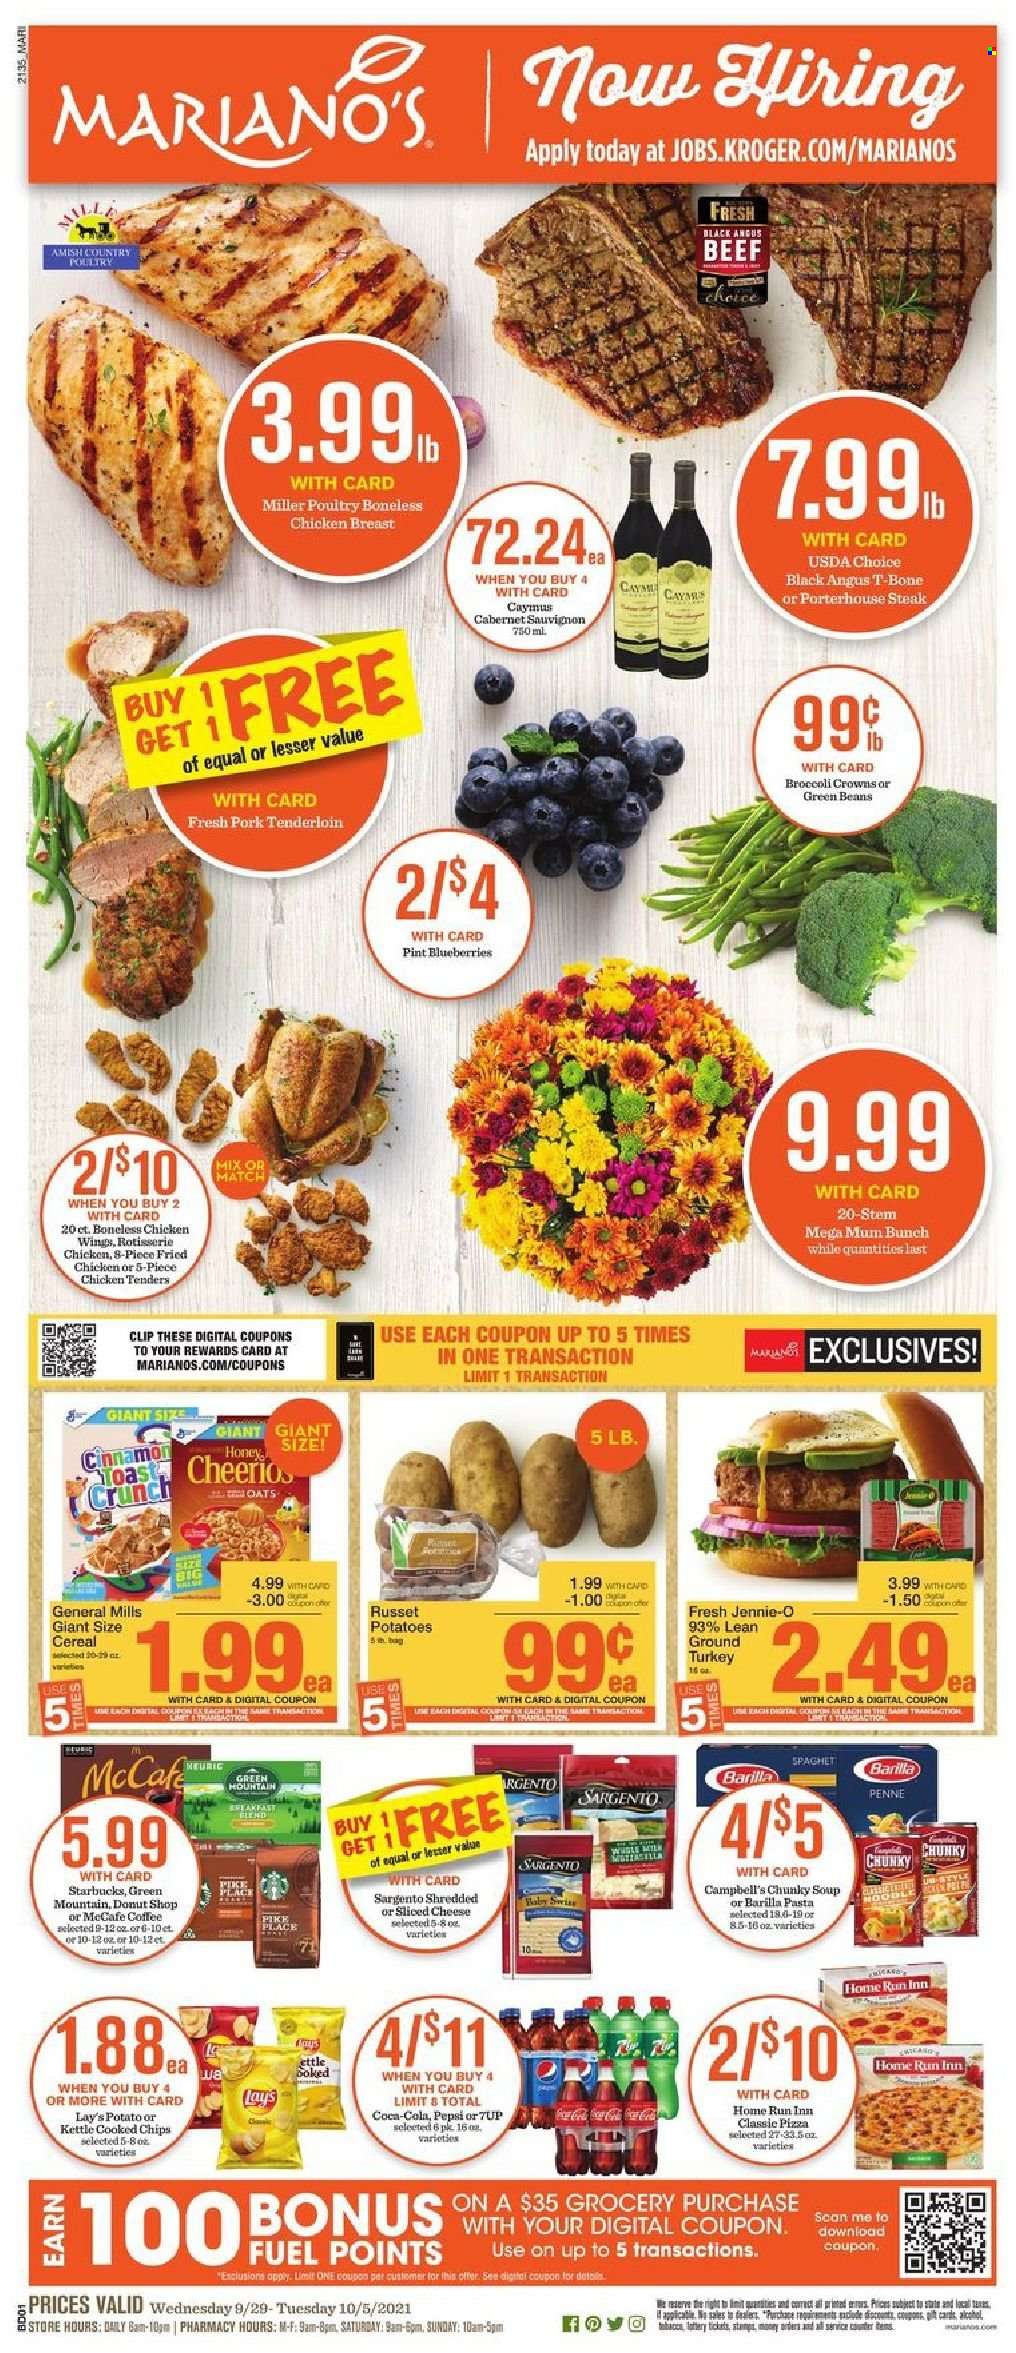 thumbnail - Mariano’s Flyer - 09/29/2021 - 10/05/2021 - Sales products - green beans, russet potatoes, potatoes, blueberries, Campbell's, pizza, chicken tenders, soup, pasta, fried chicken, Barilla, sliced cheese, Sargento, chicken wings, chips, Lay’s, oats, cereals, penne, cinnamon, honey, Pepsi, 7UP, coffee, Starbucks, L'Or, Green Mountain, Cabernet Sauvignon, red wine, wine, alcohol, Miller, ground turkey, chicken breasts, beef meat, t-bone steak, steak, pork meat, pork tenderloin. Page 1.